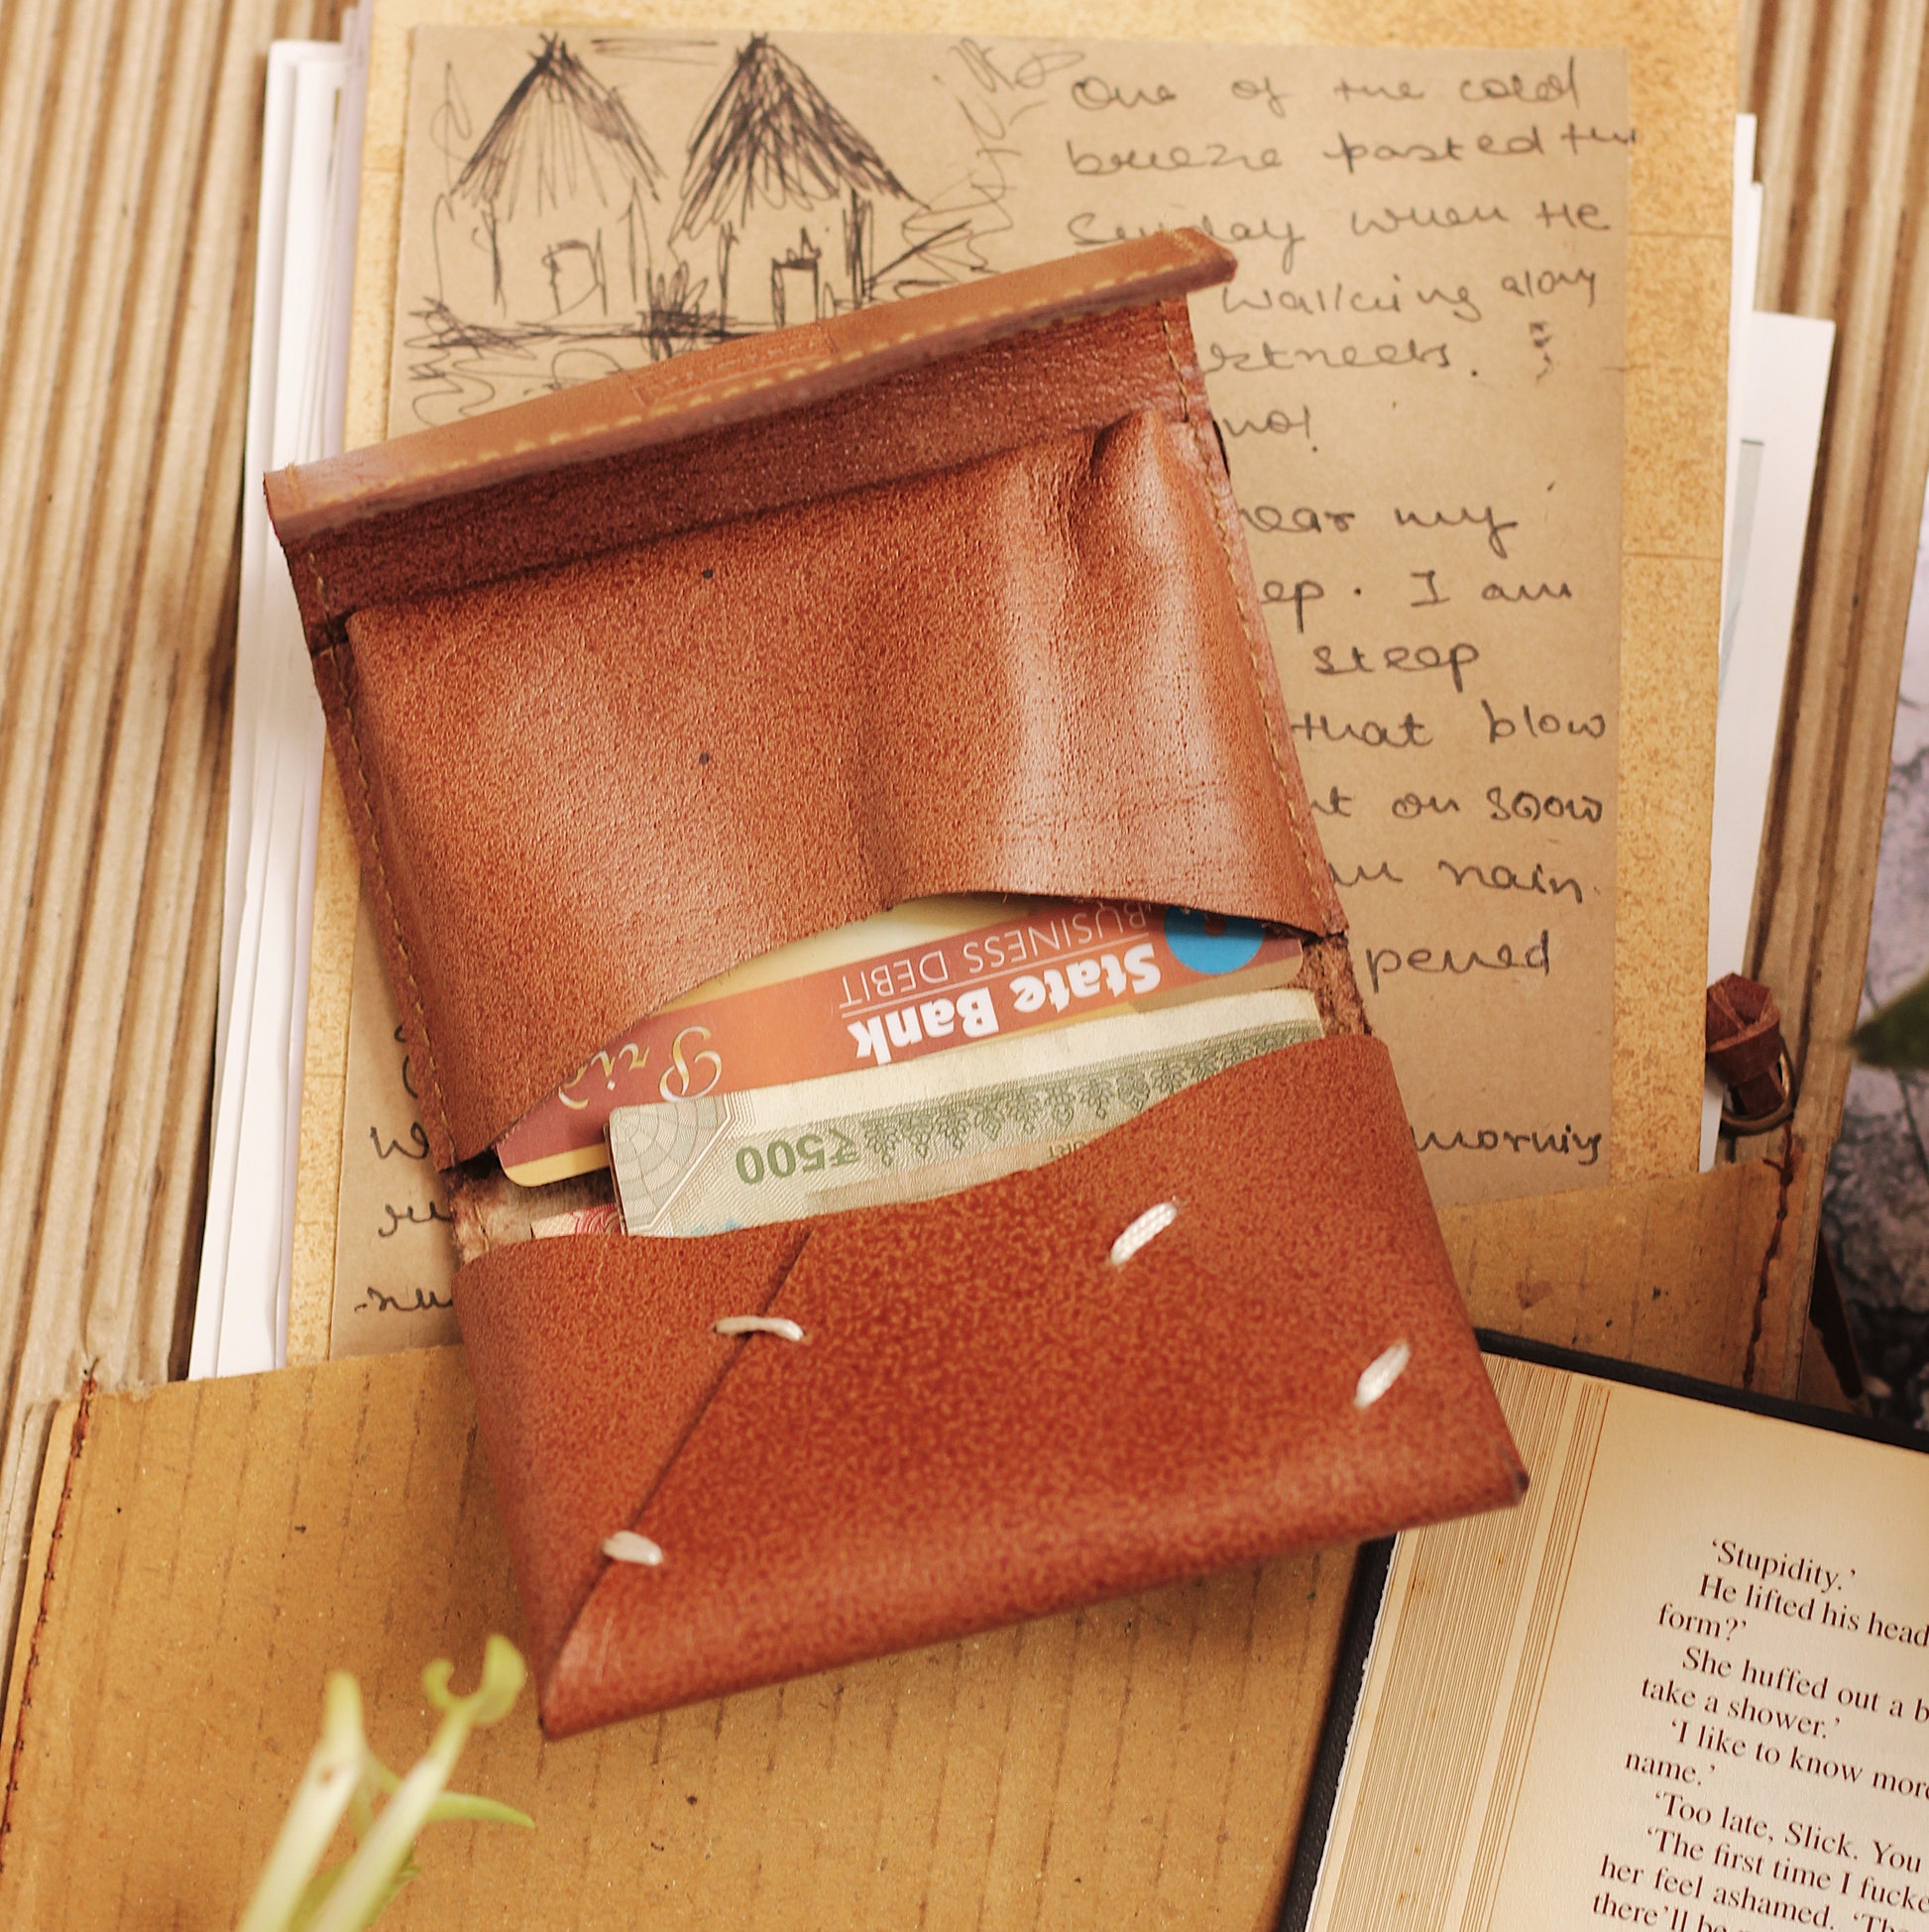 Card Holder is a quintessential accessory in today's fast paced life. Handcrafted in leather, it allows you to keep your cards and a small amount of cash in its folds. You can easily carry the Card Holder in your hand or keep it in your pocket.